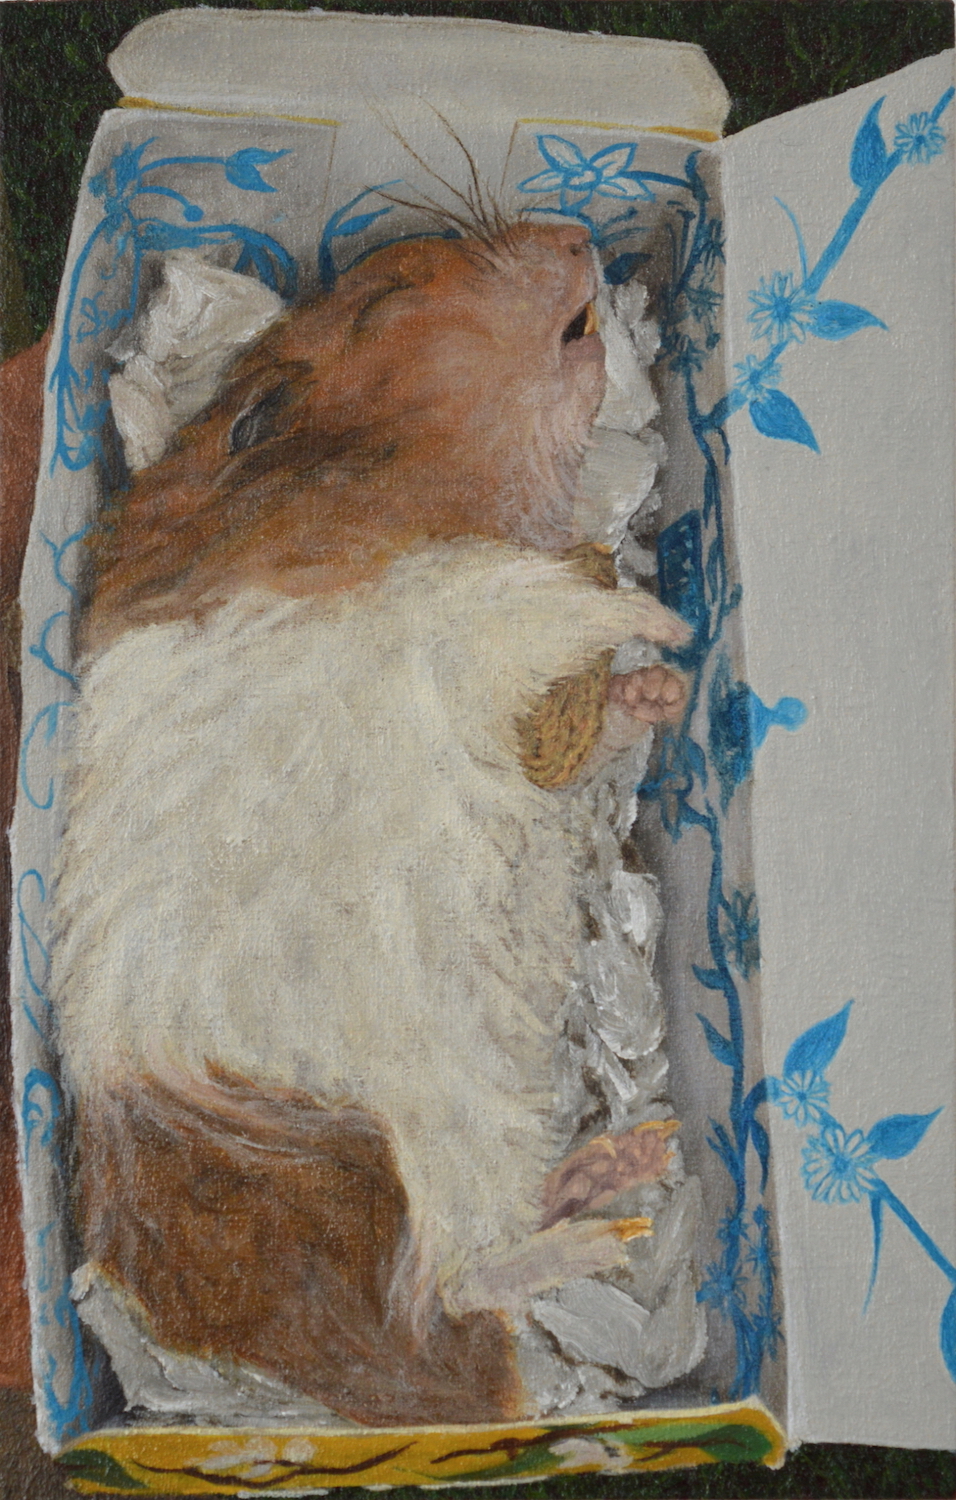 'Dead Godot In A Turmeric Gold Tea Box', Maddy Buttling, Oil on plywood, 17.5 x 11 cm